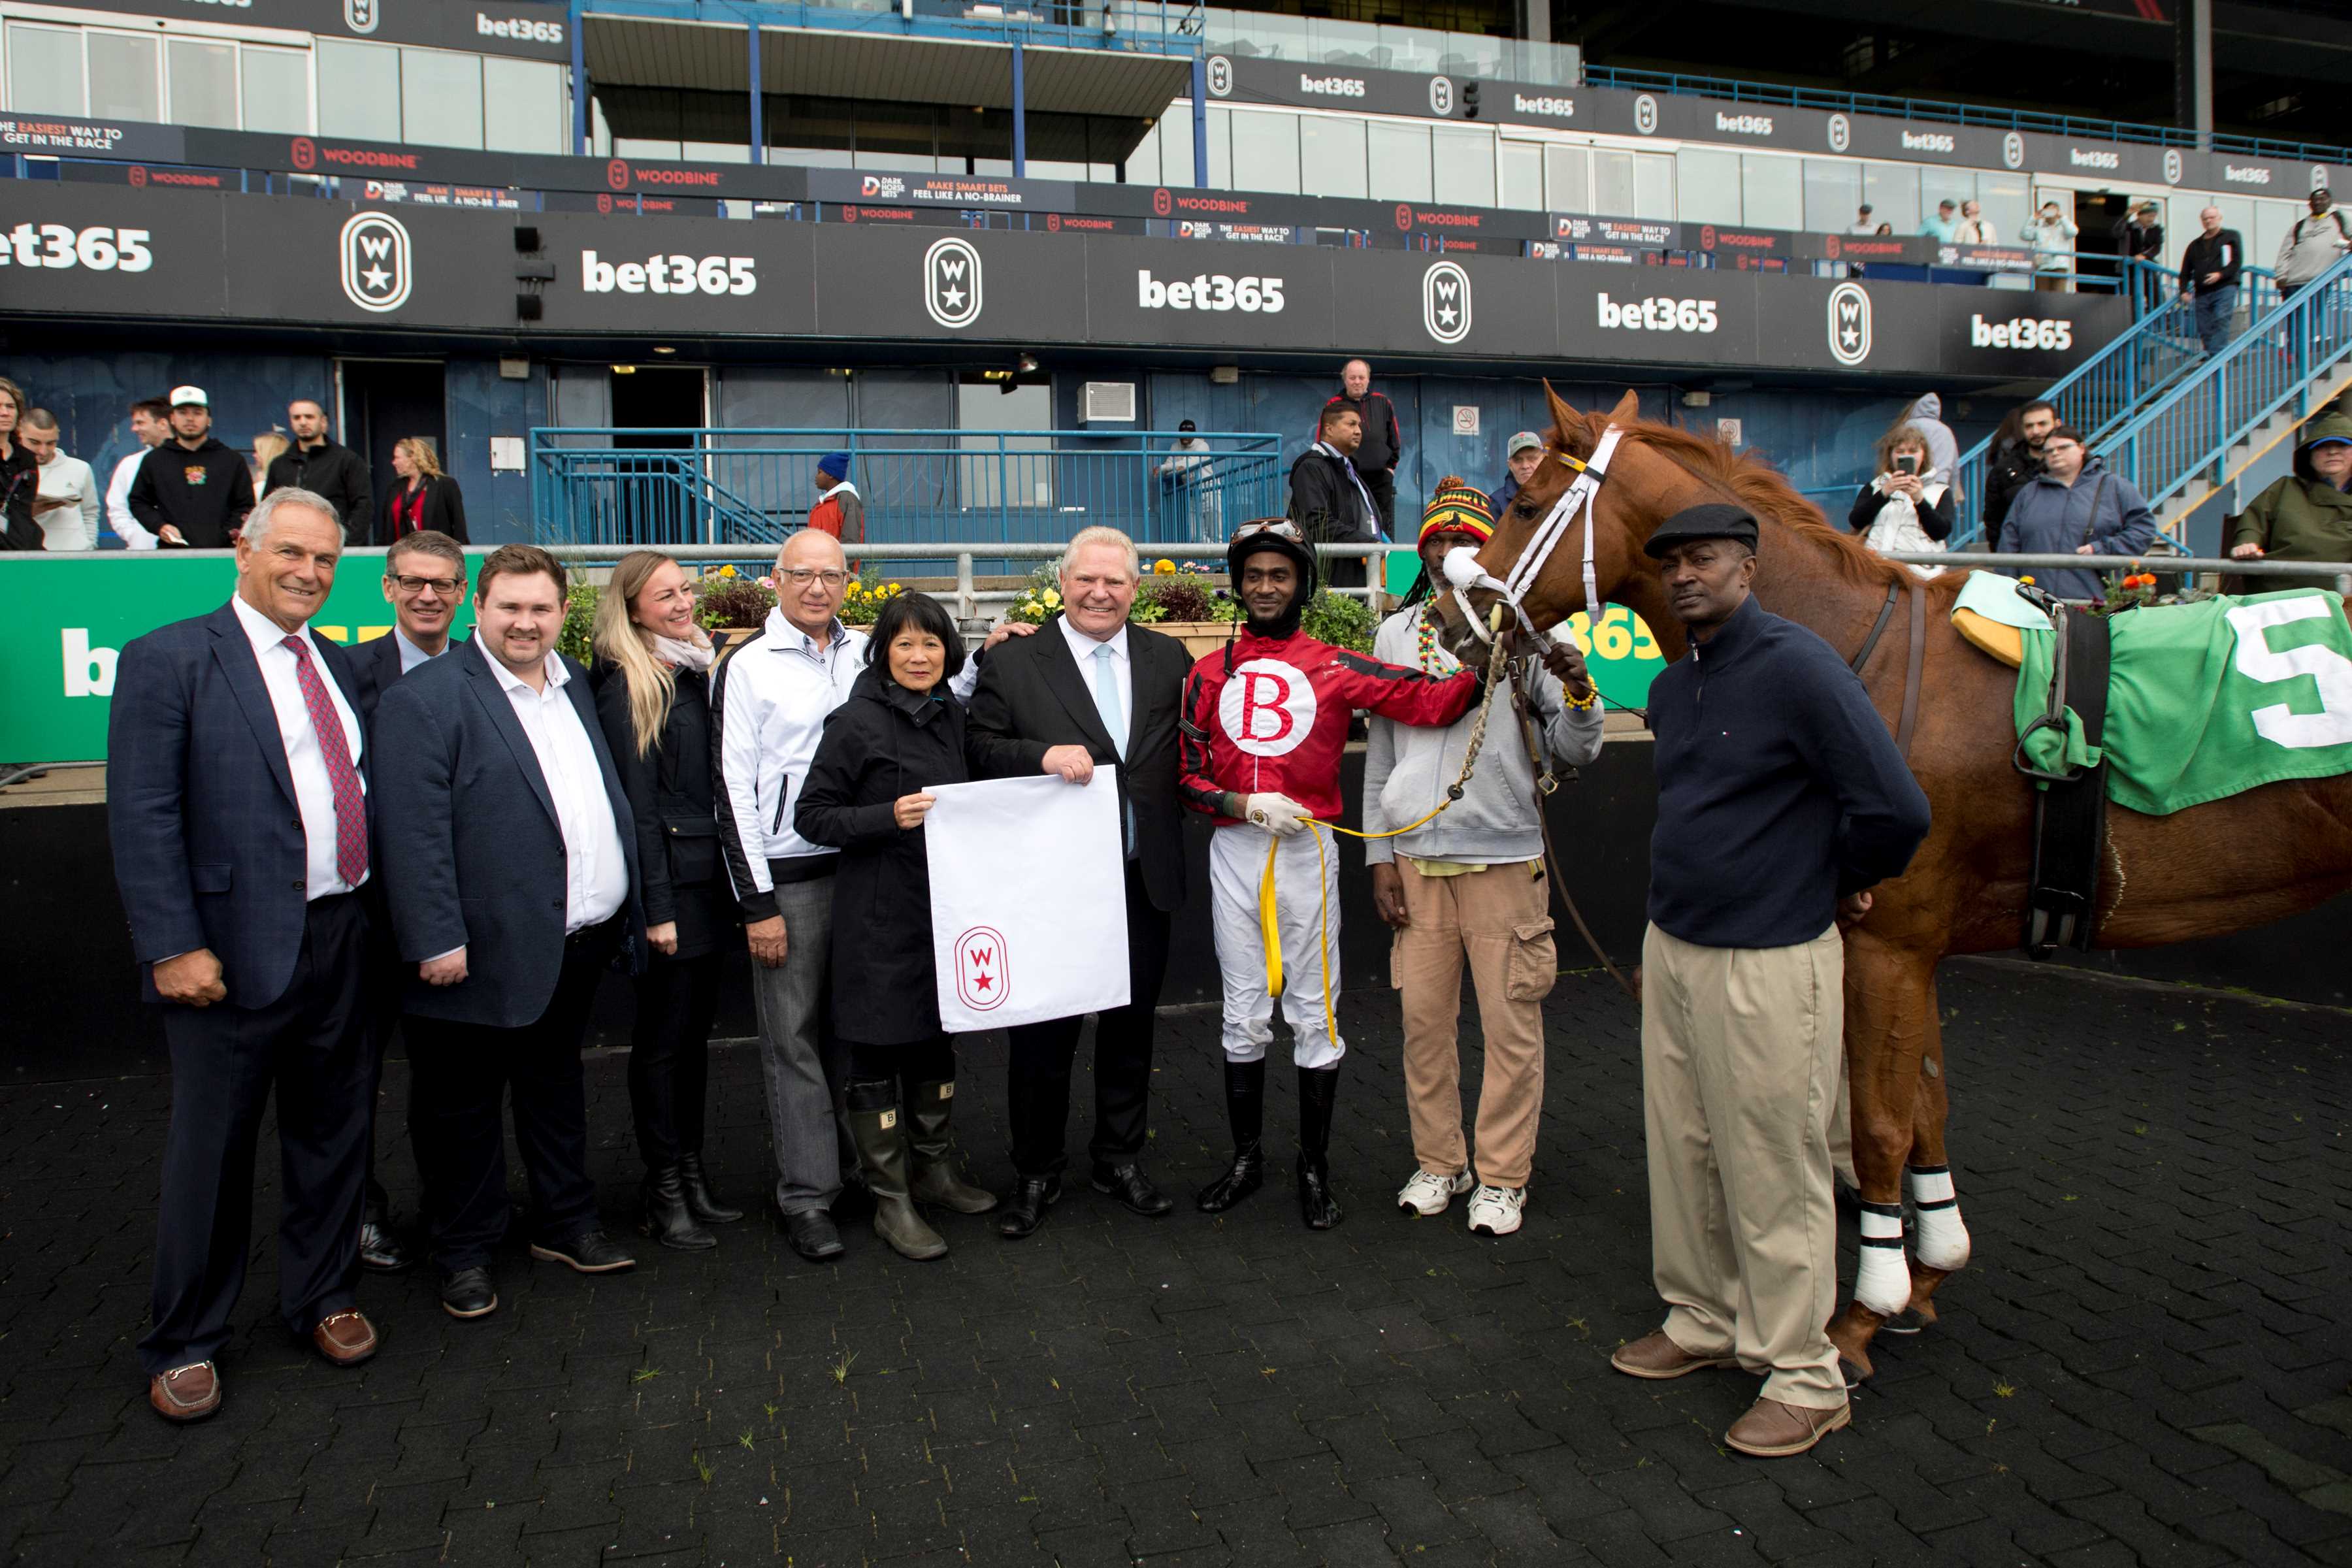 (From left to right) Jim Lawson (Executive Chair, Woodbine, Michael Copeland (CEO, Woodbine), Minister Michael Ford, Councilor Vincent Crisanti, Mayor Olivia Chow, Premier Doug Ford, Jockey Jason Hoyte, trainer Ted Holder (Michael Burns Photo)